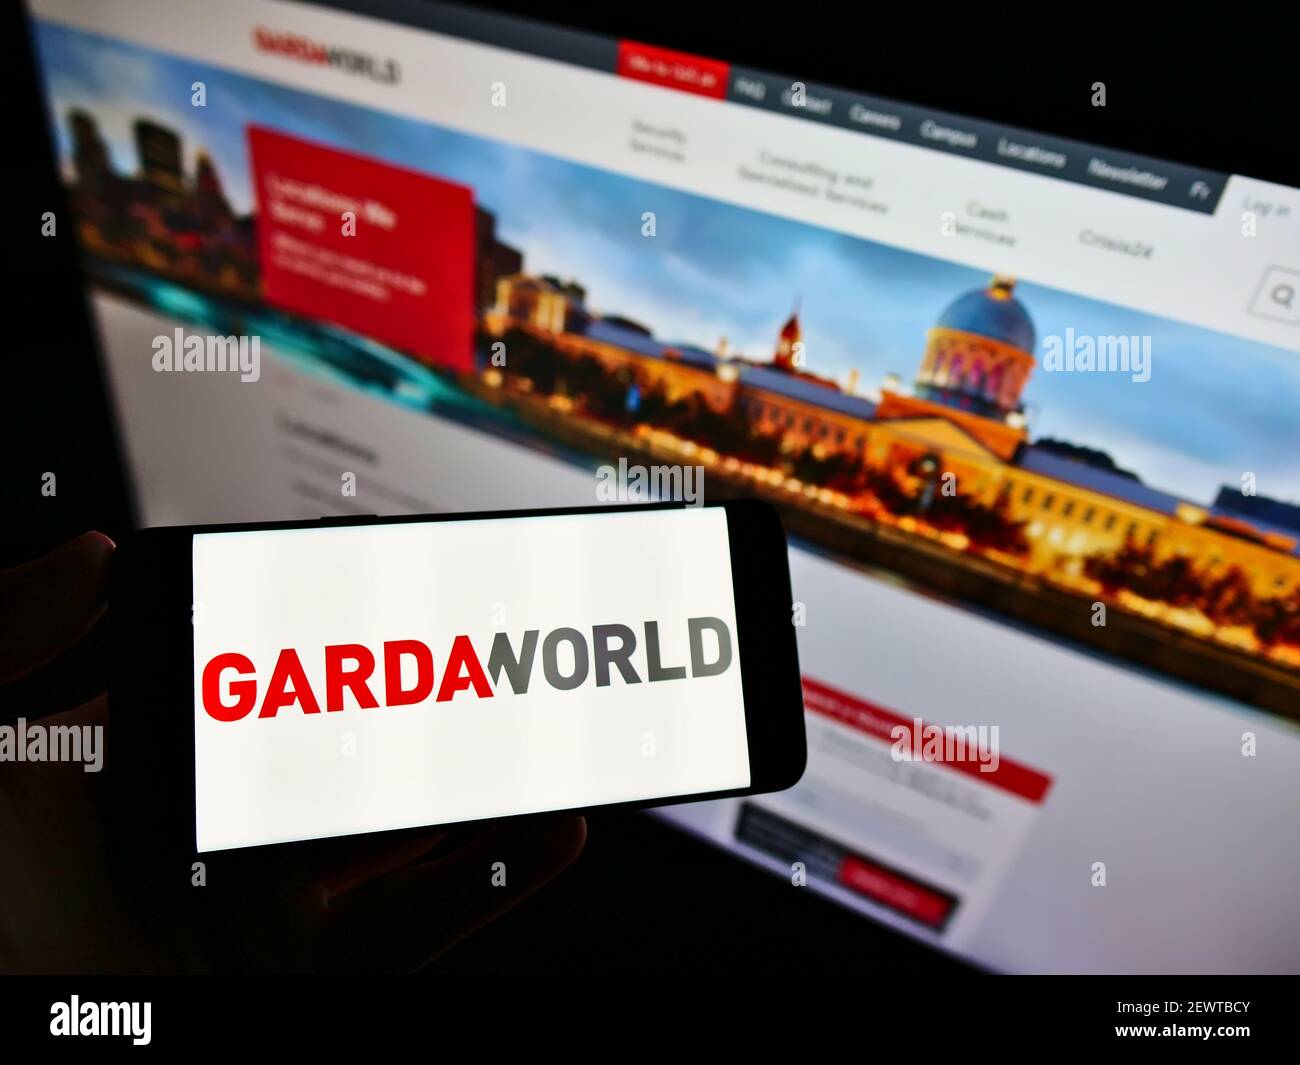 Person holding cellphone with business logo of Canadian private security firm GardaWorld on screen in front of website. Focus on smartphone display. Stock Photo